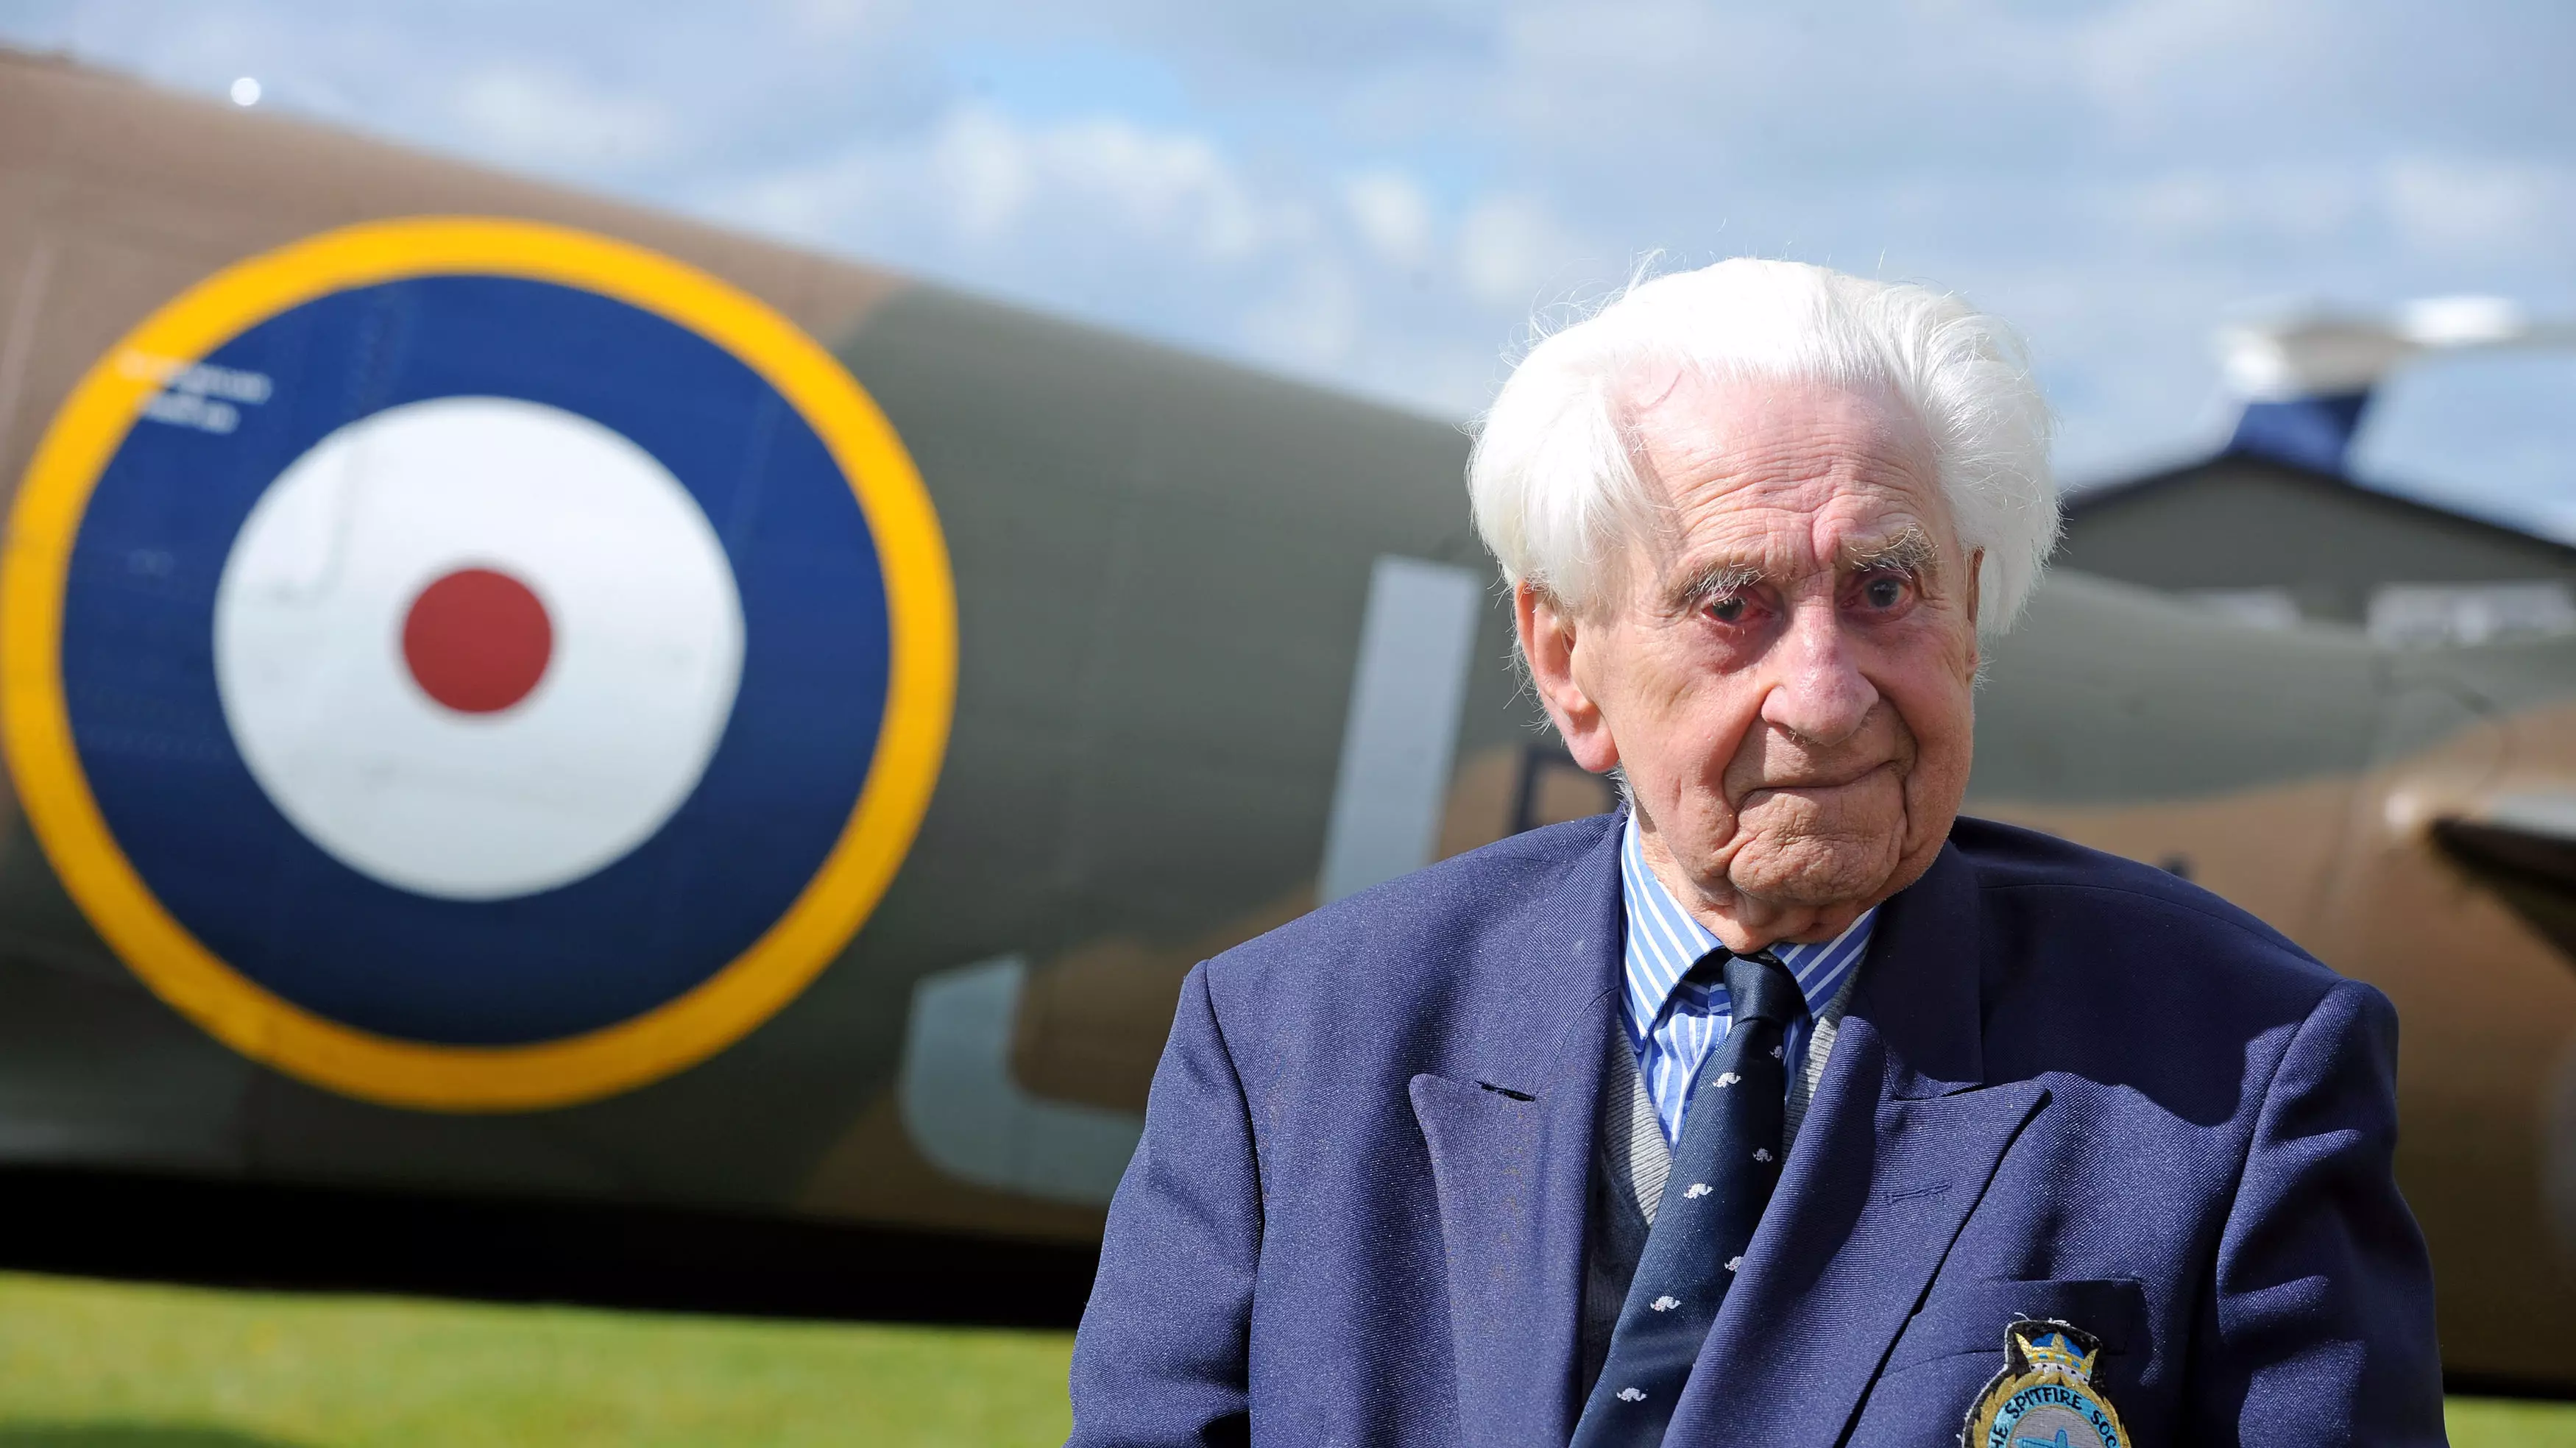 One Of The Last Surviving Battle Of Britain Spitfire Pilots Has Died Aged 99